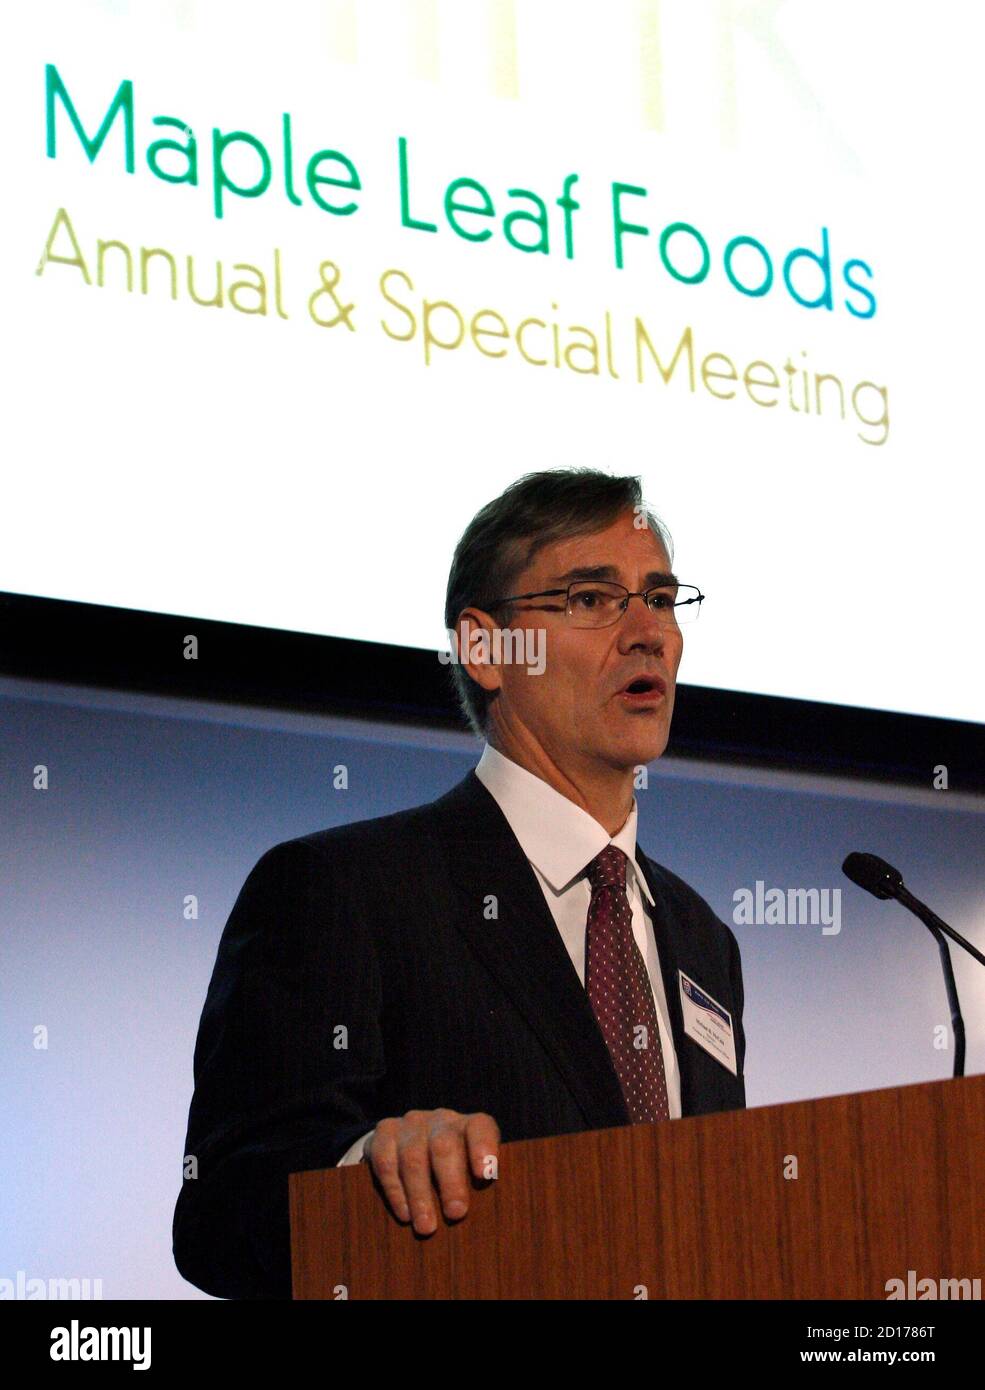 Maple Leaf Foods Inc. President and Chief Executive Officer Michael McCain speaks to shareholders during the company's annual general meeting in Mississauga, April 29, 2009.    Maple Leaf Foods, one of Canada's largest food processors, reported a quarterly profit on Wednesday but the effects of last summer's costly recall of tainted meat lingered on.    REUTERS/ Mike Cassese   (CANADA BUSINESS FOOD) Stock Photo